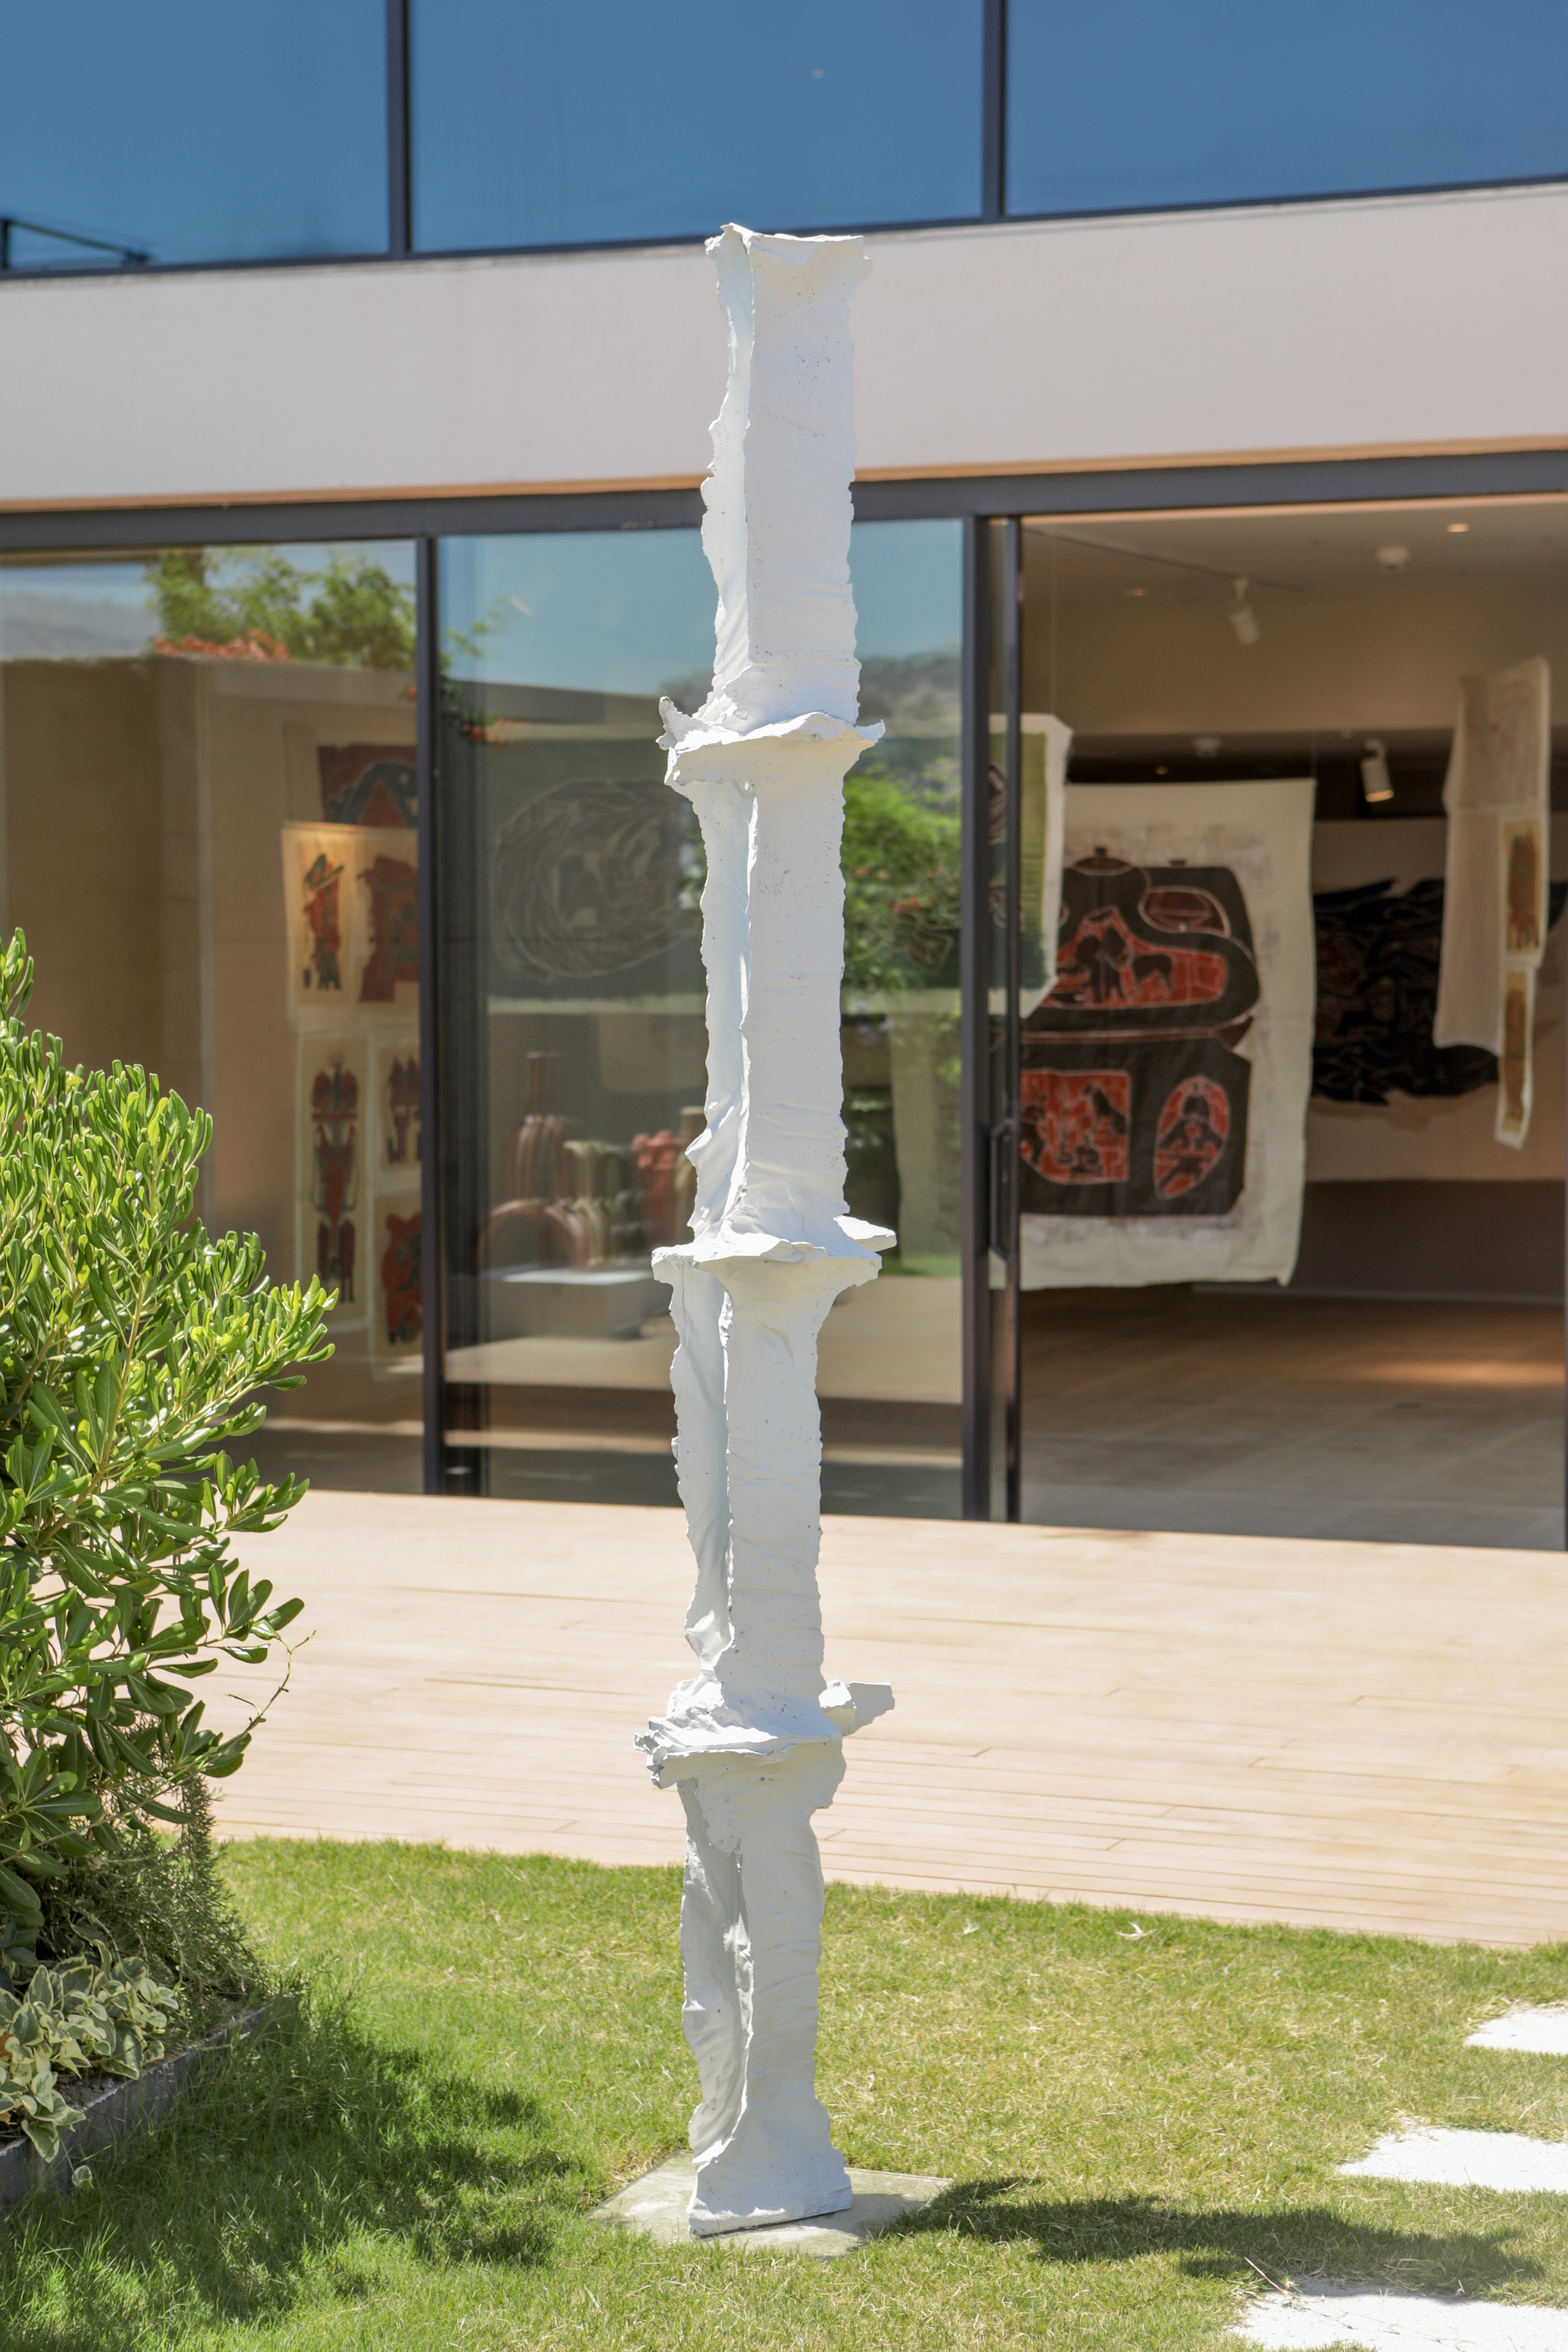 A work by Stijn Ank on display at Bodrum Bodrum Coastal Houses.